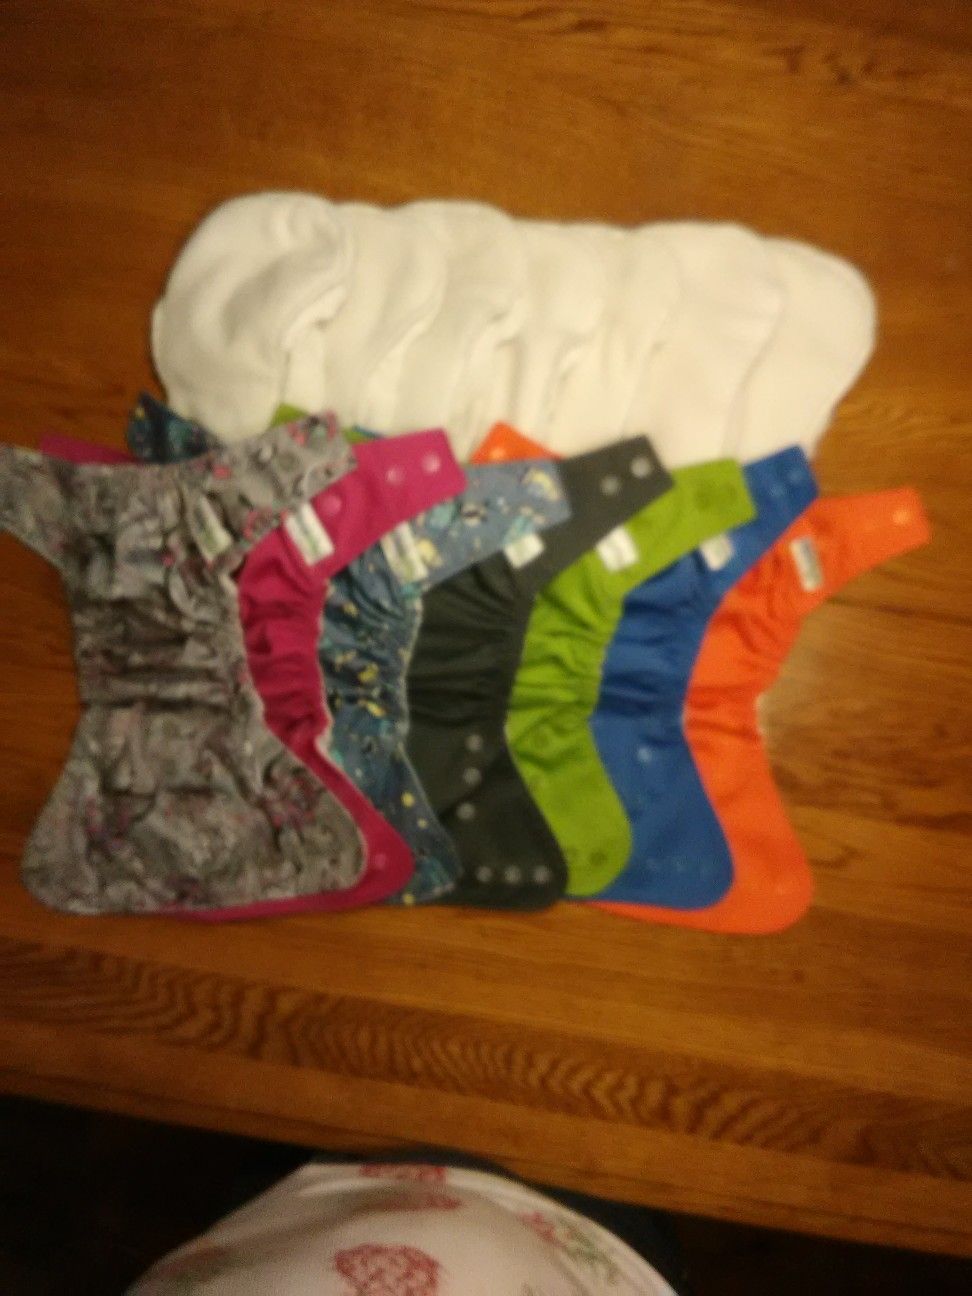 Cloth diapers GroVia AI2 covers and no prep soakers $65.00 for lot